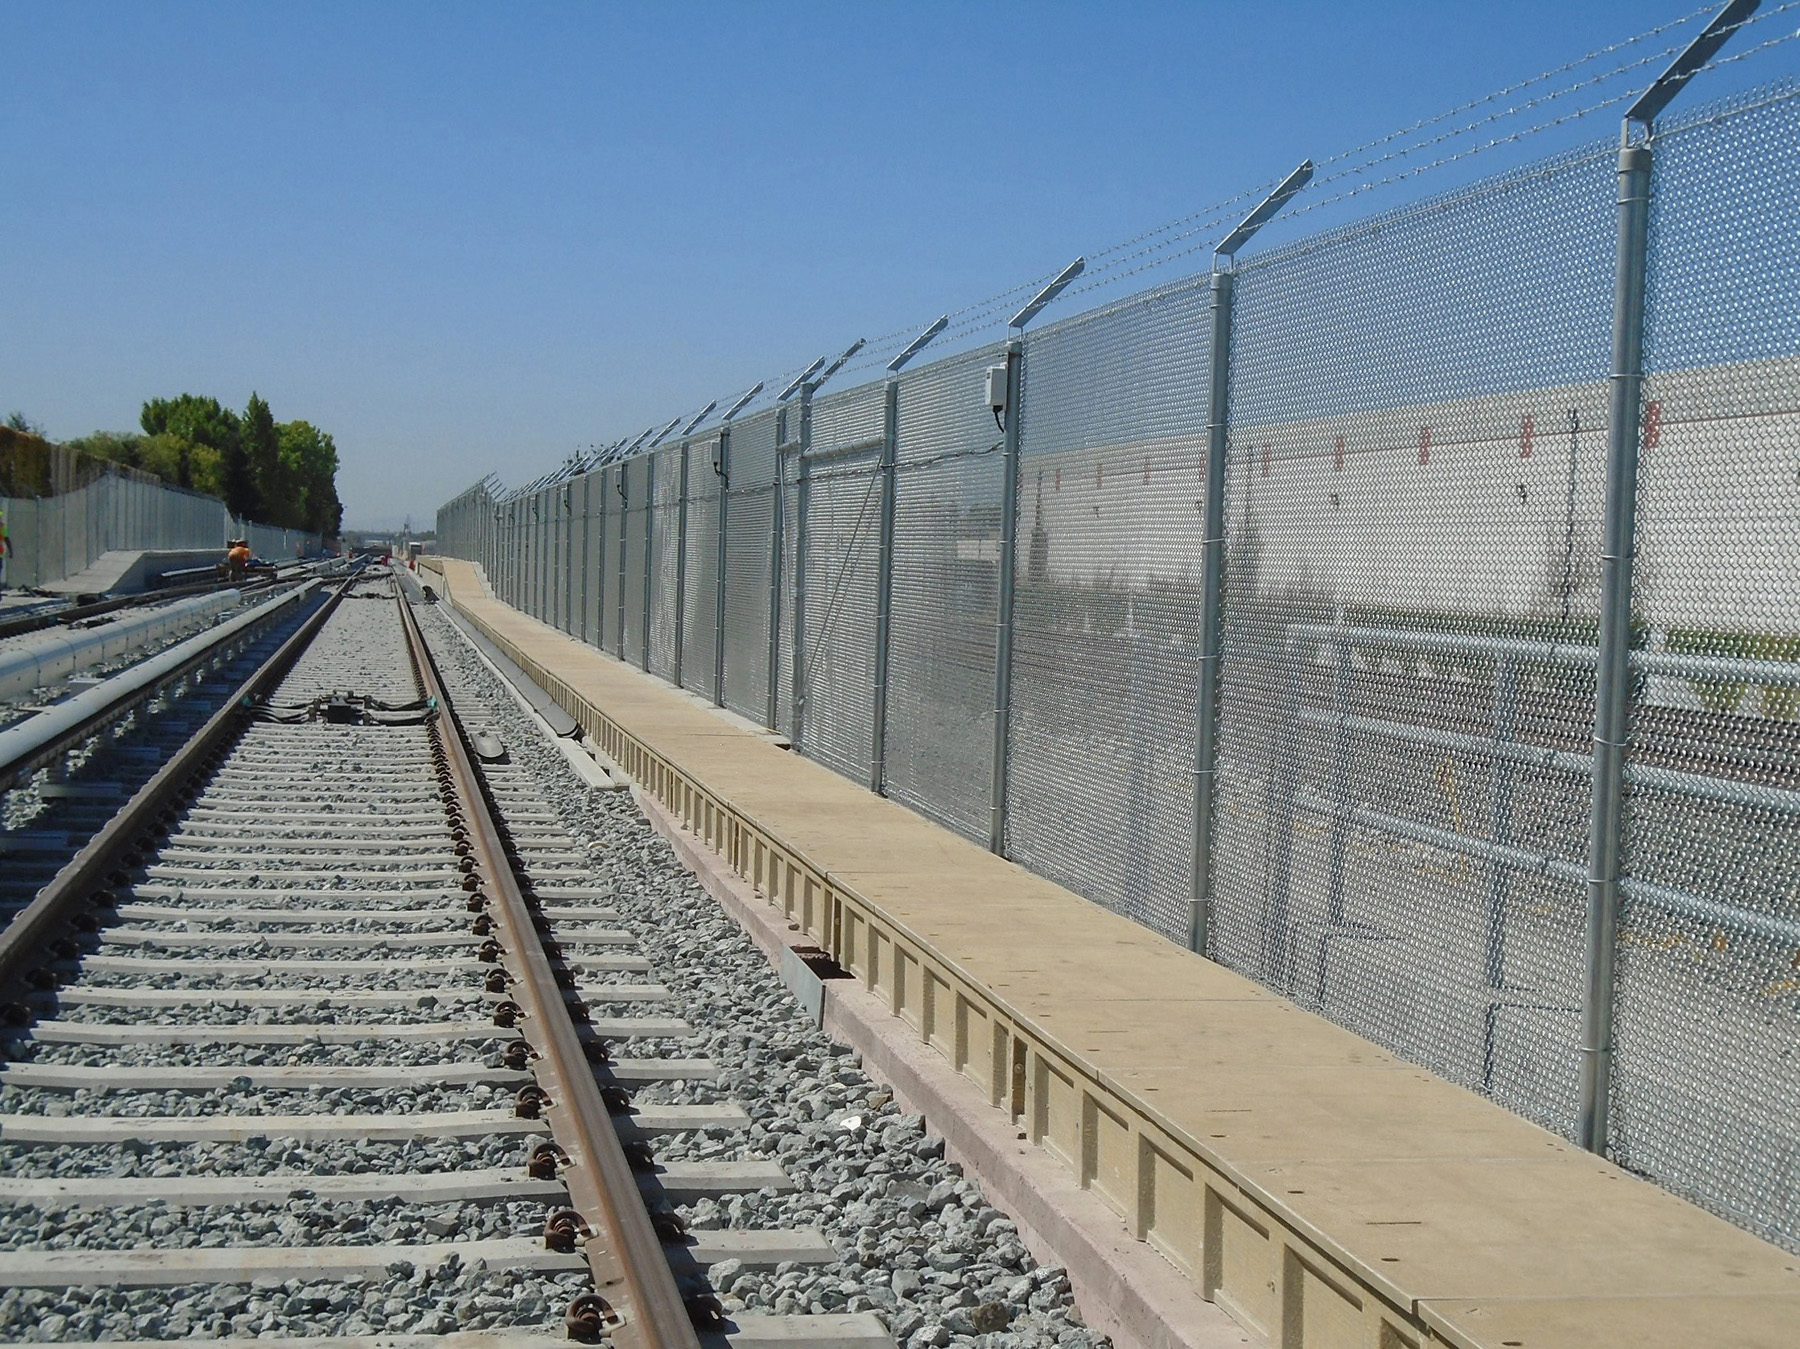 photographing showing the fence separating the BART and Union Pacific railroad tracks on the Berryessa extension